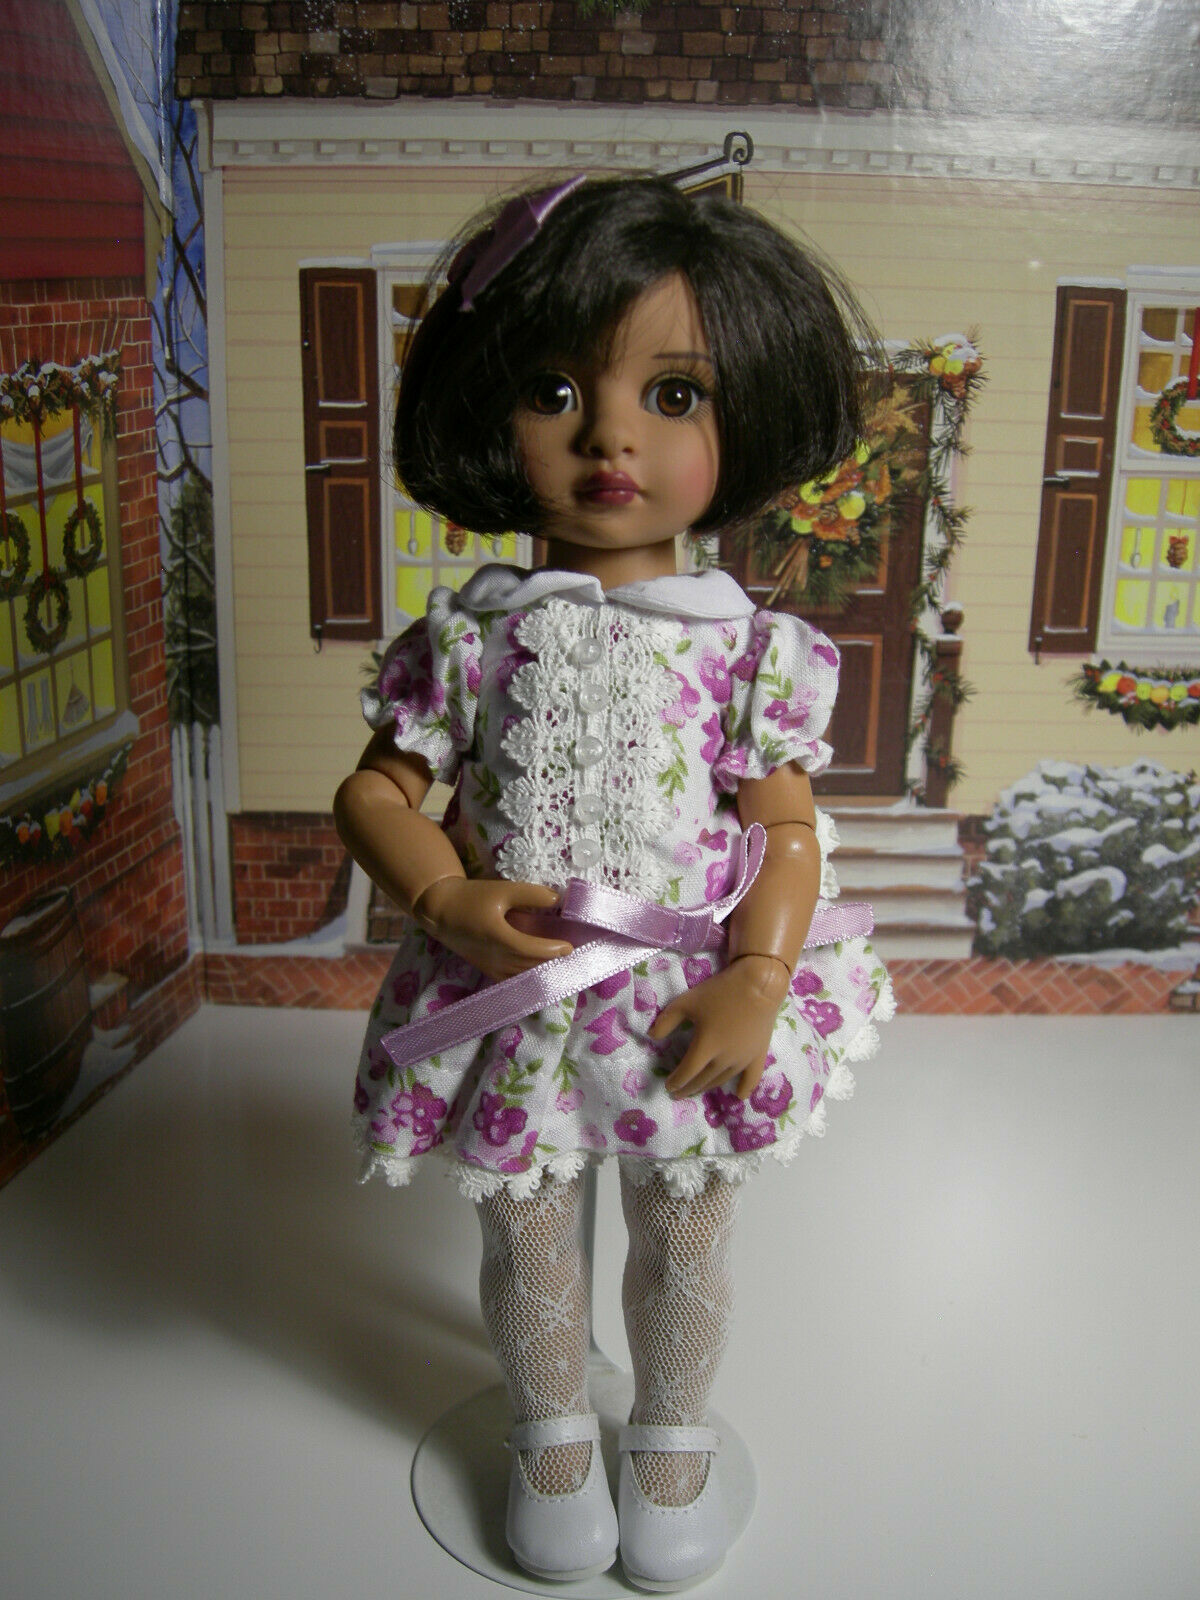 Rare Tonner Doll 2014 W/ Outfit Flower Dress White Shoes